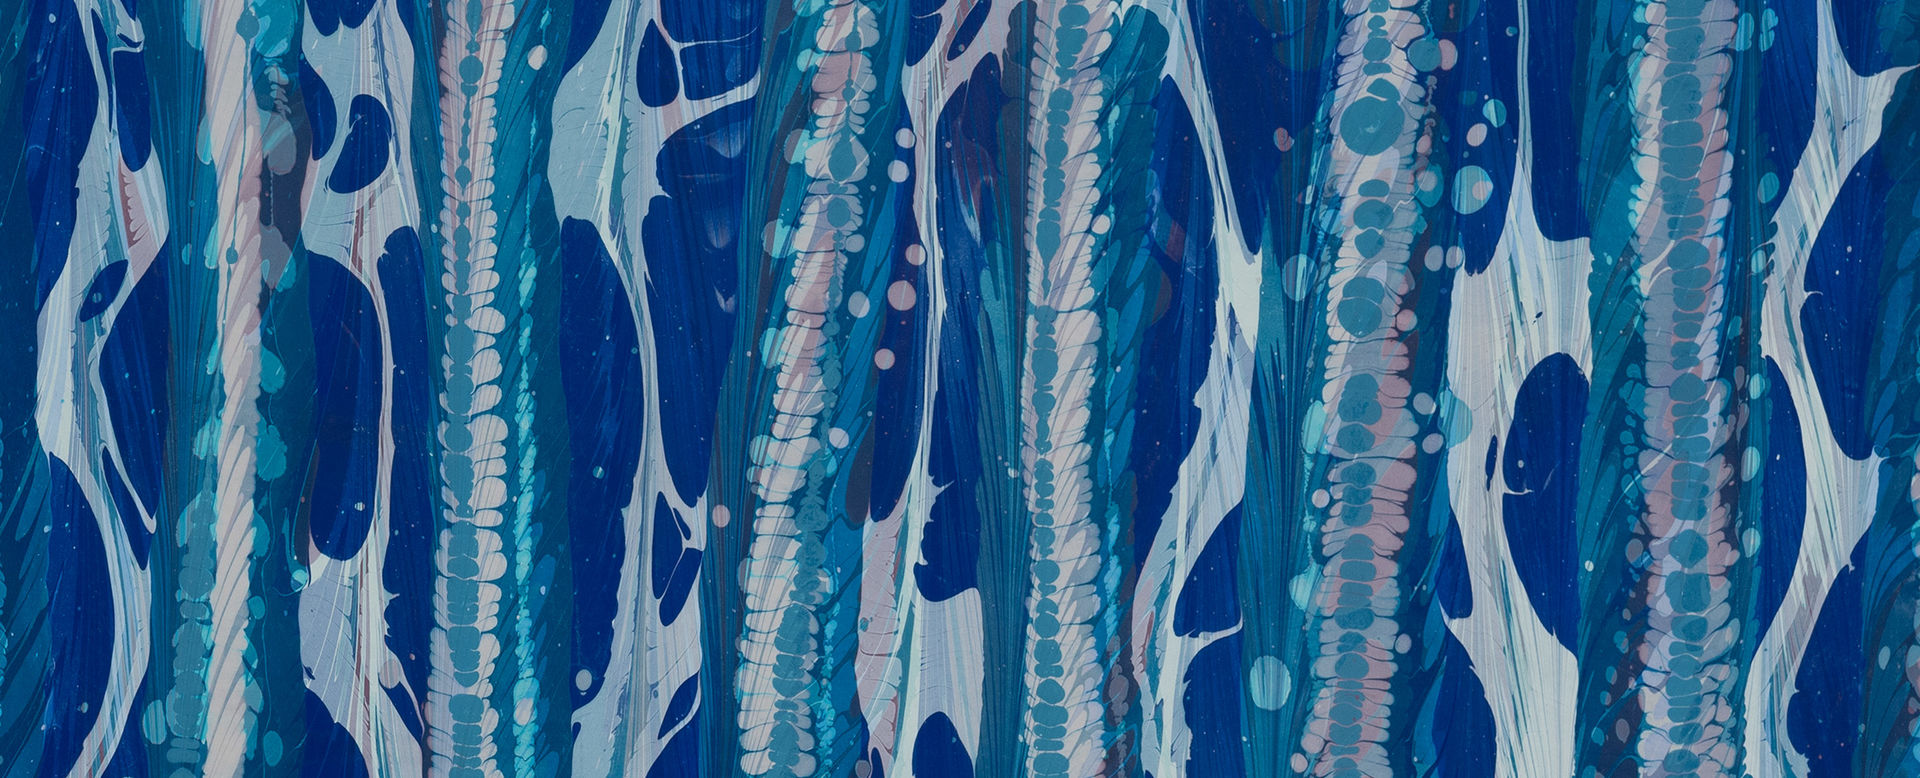 Detail of marbled paper in shades of blue and pink